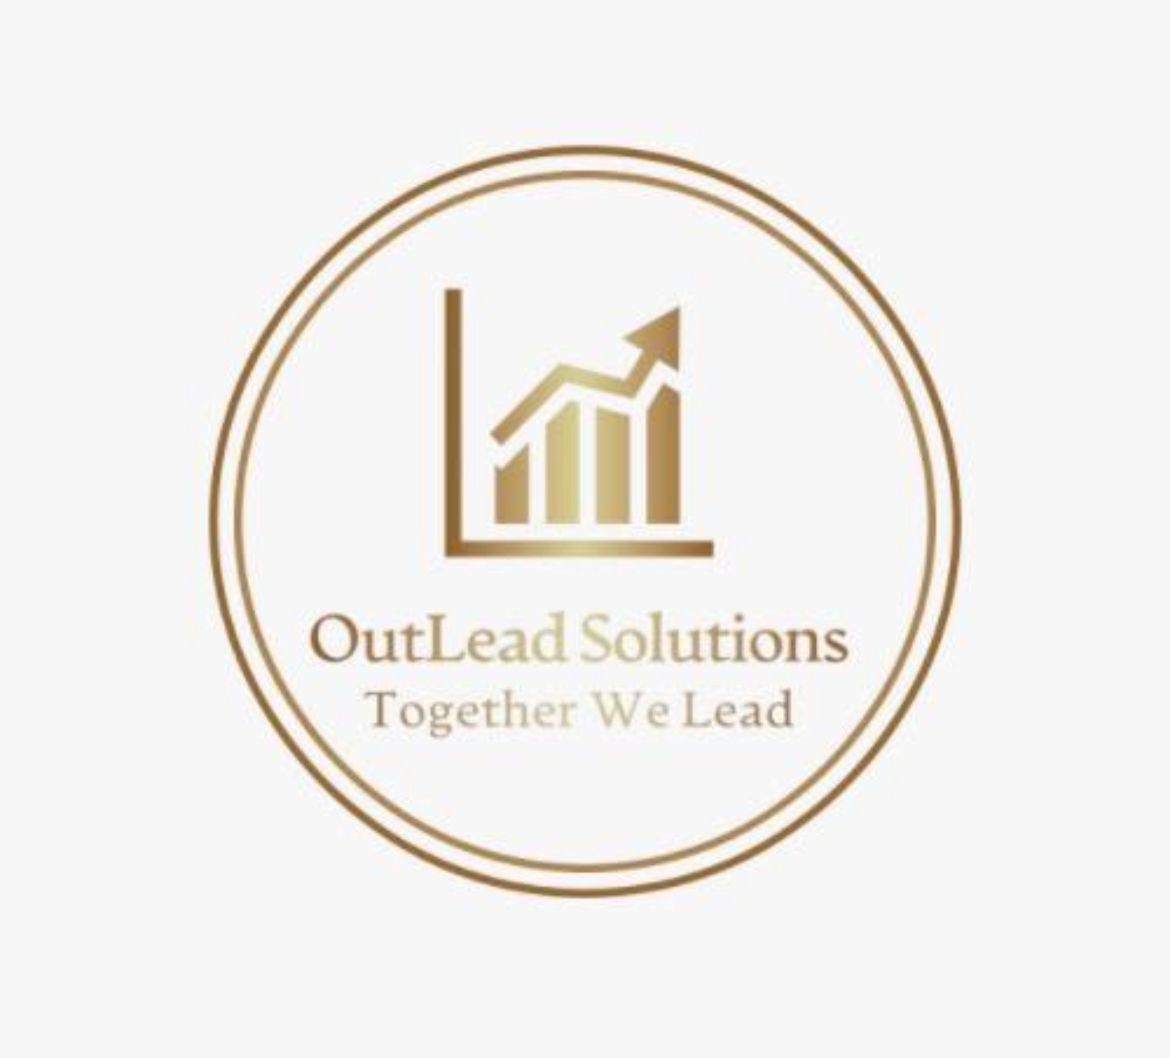 Outlead Solutions